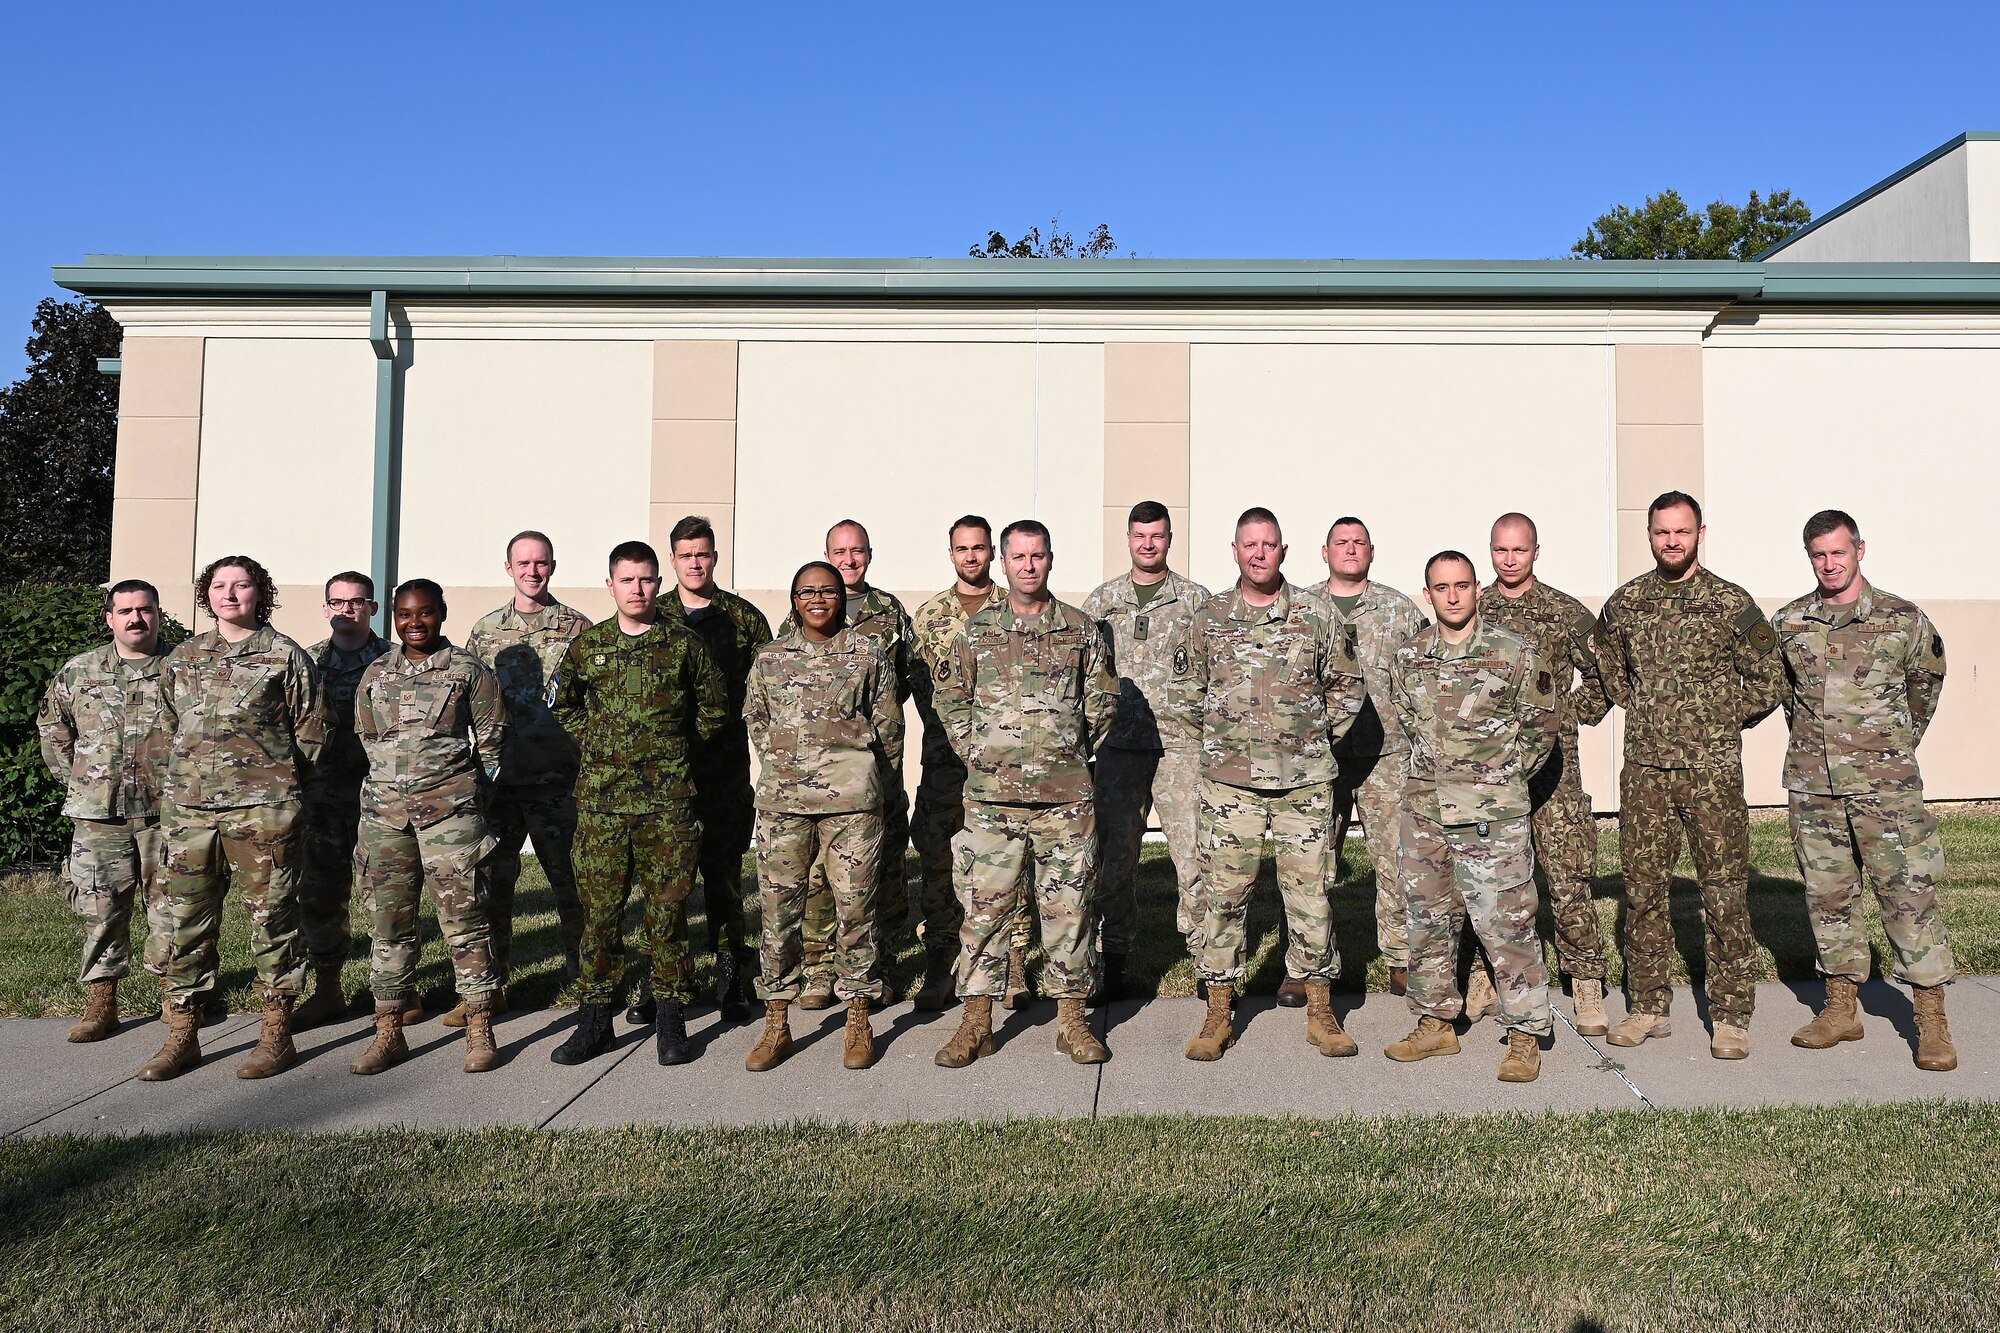 Airmen assigned to the 123rd Air Control Squadron in Blue Ash pose alongside service members from four NATO nations: Estonia, Lithuania, Latvia and Hungary. The training, which included air battle management, ground control intercept, large-force employment and air-to-air combat beyond visual range, began September 11 and concluded September 22, 2023. (U.S. Air National Guard photo by Shane Hughes)